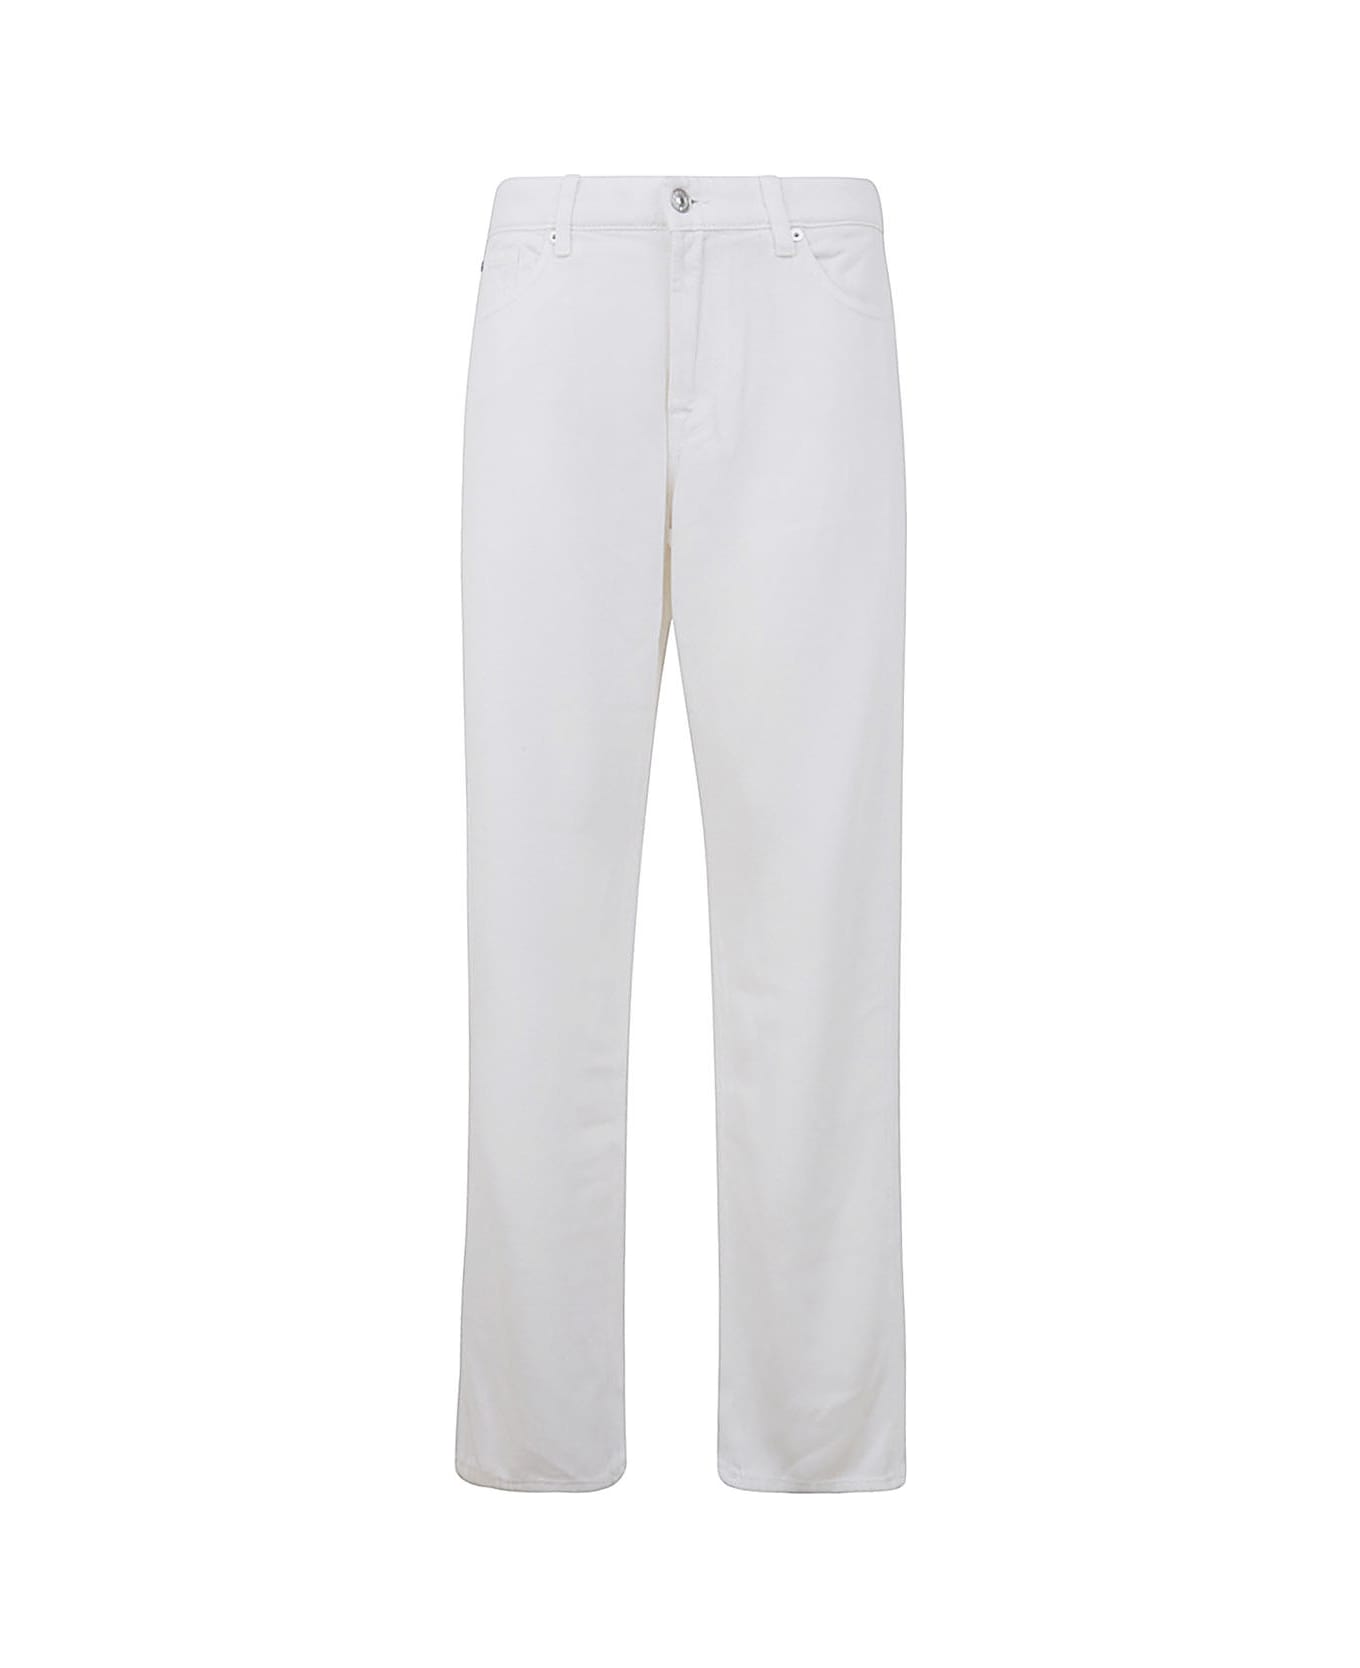 7 For All Mankind Tess Trouser Colored Tencel - White